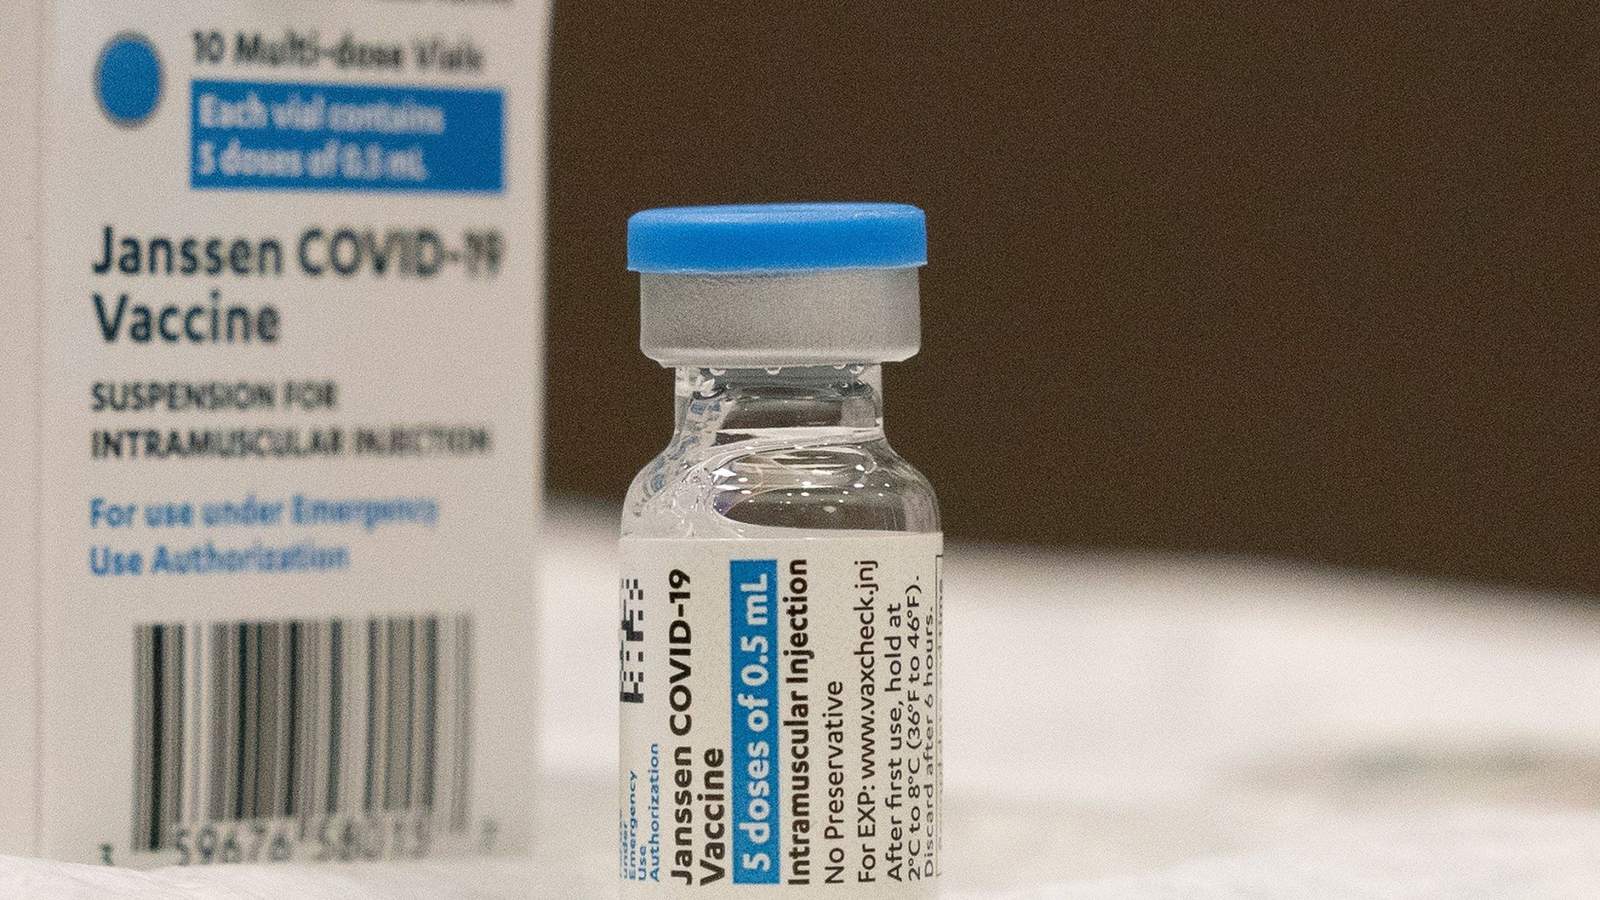 Johnson and Johnson COVID vaccine pause will slow efforts of vaccinating those in rural communities